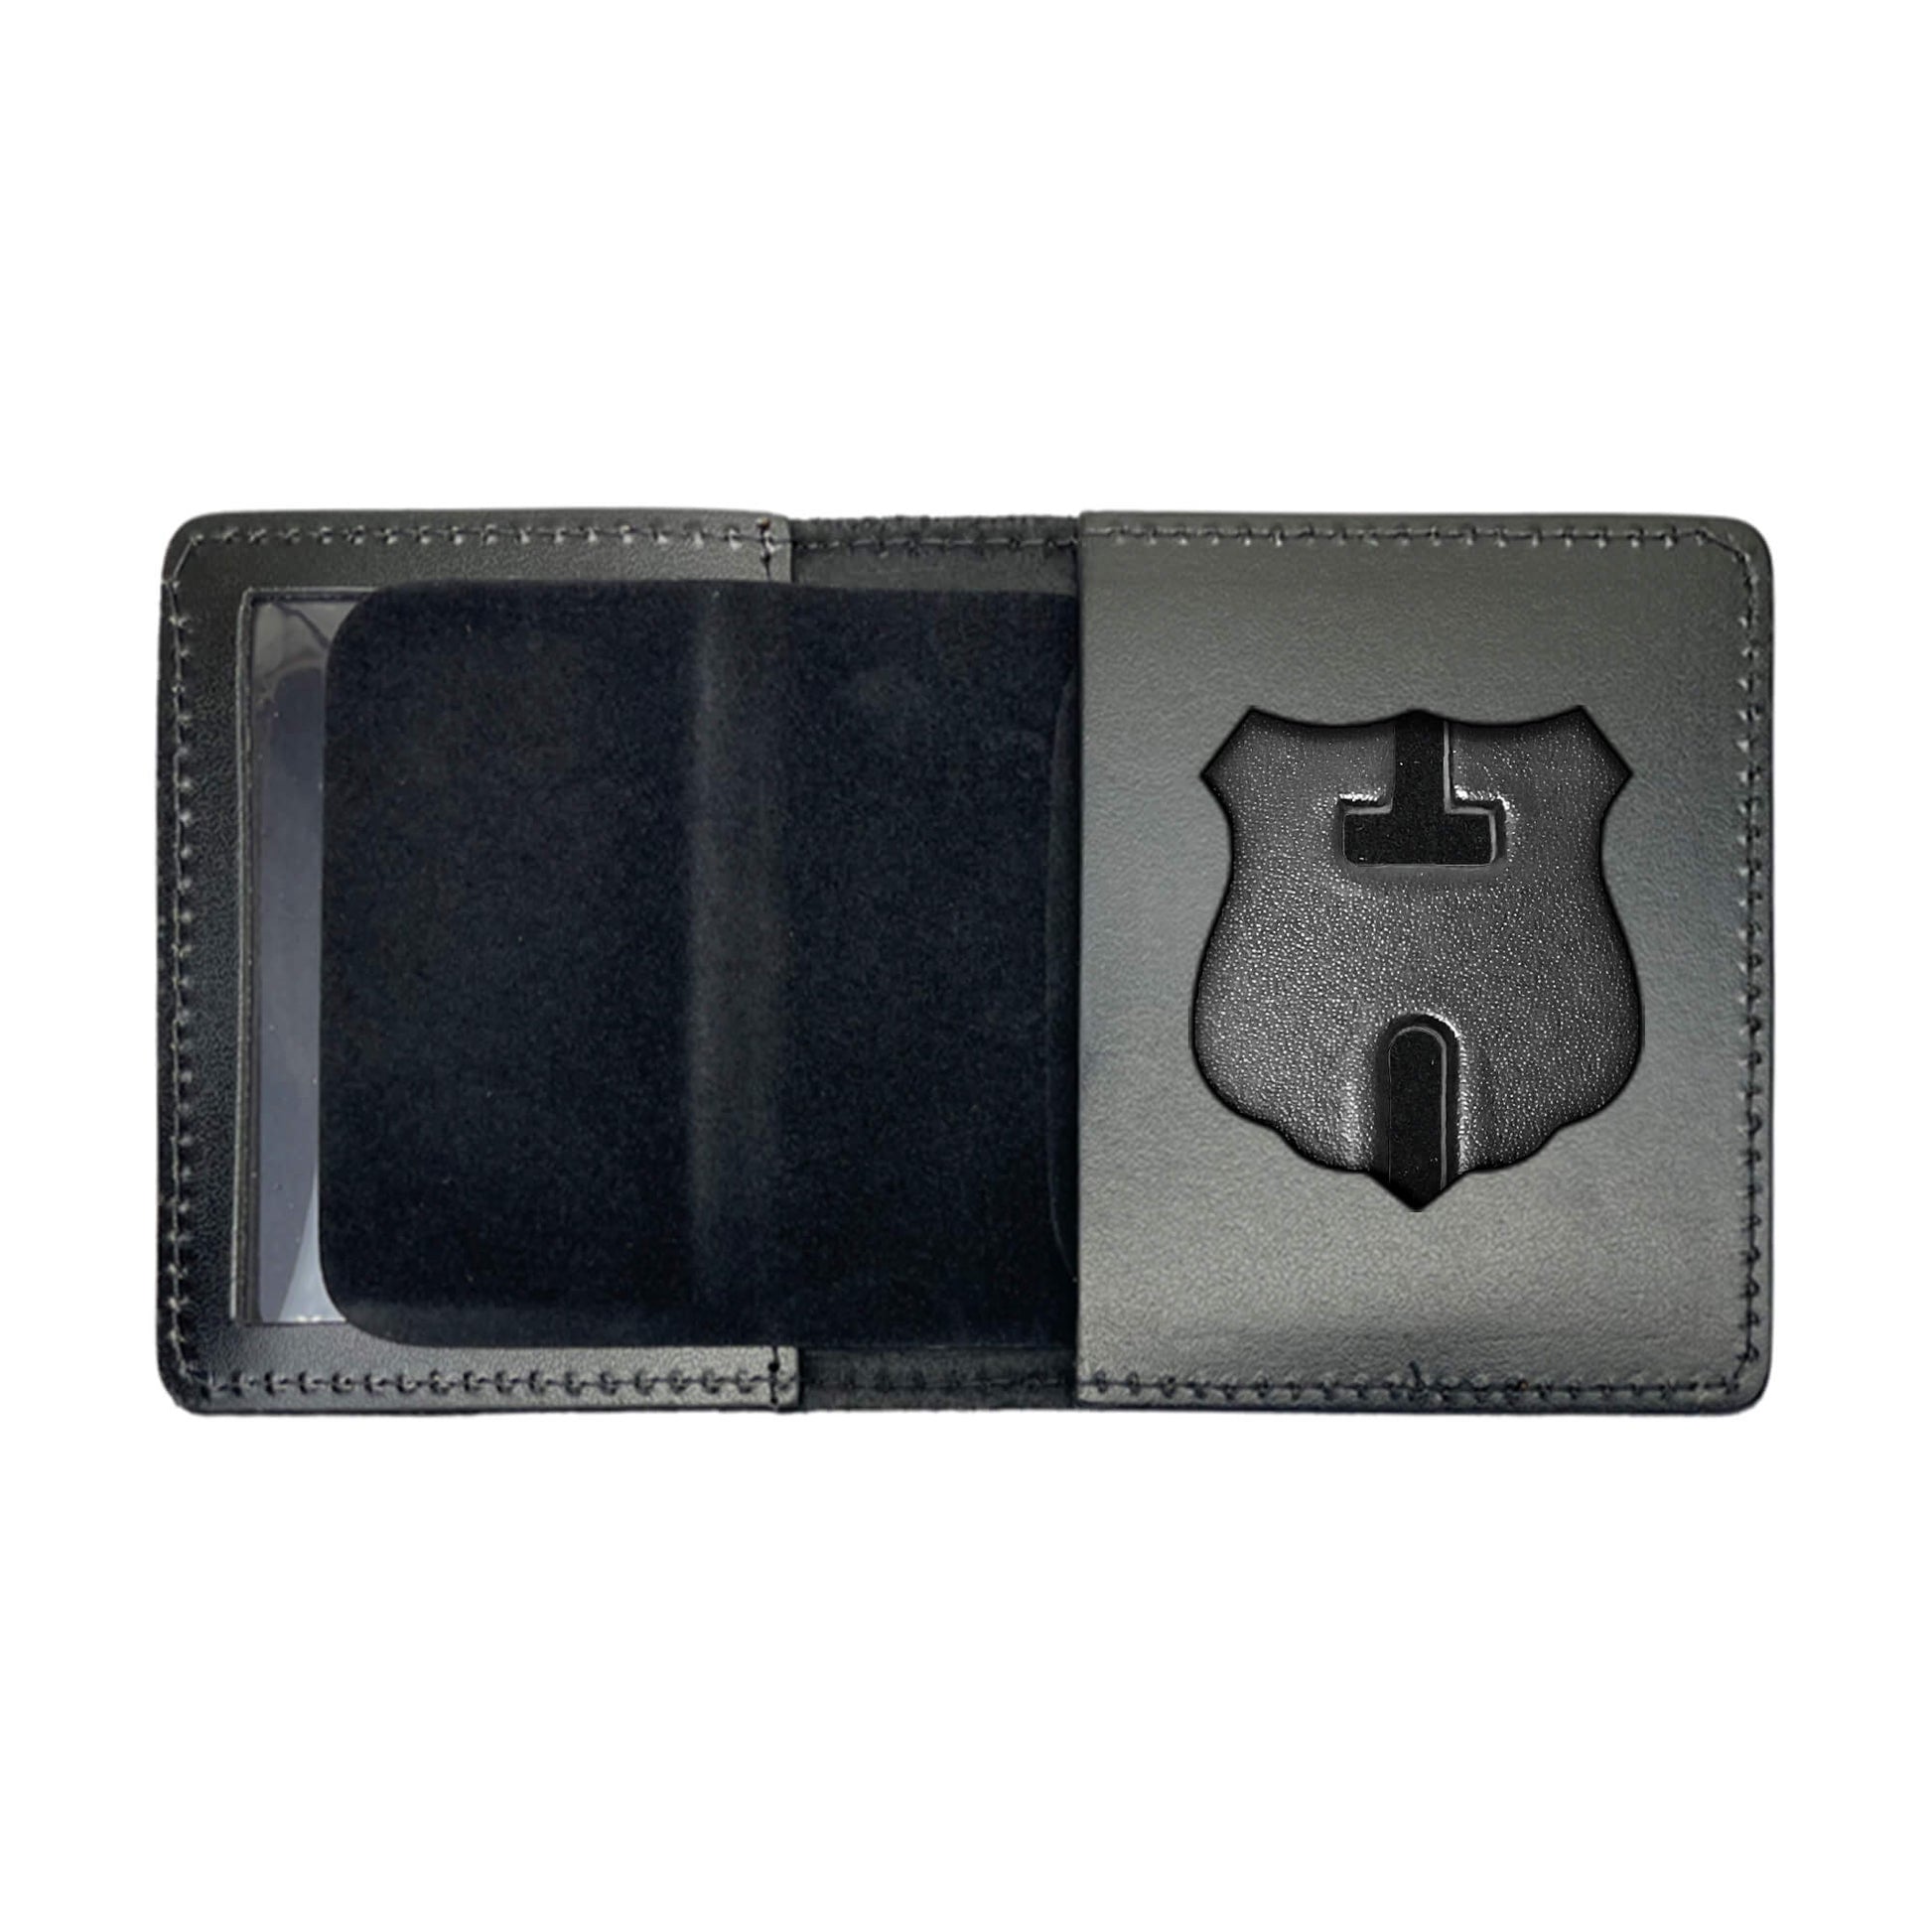 OPP Ontario Provincial Police Badge/ ID Case with Credit Card Slots